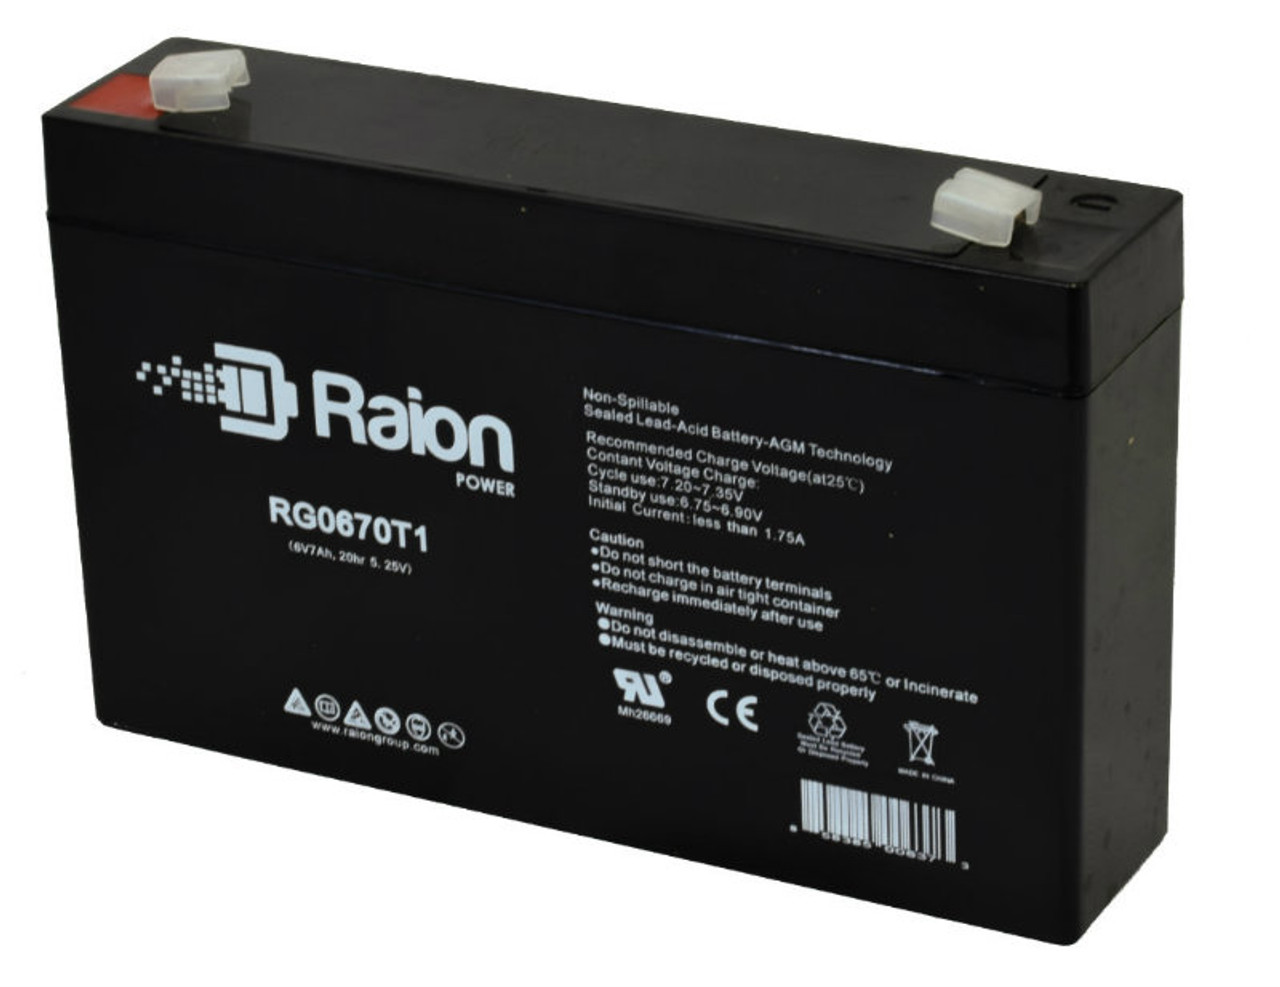 Raion Power RG0670T1 Replacement Battery for Narada 3-FM-8 OEM Battery